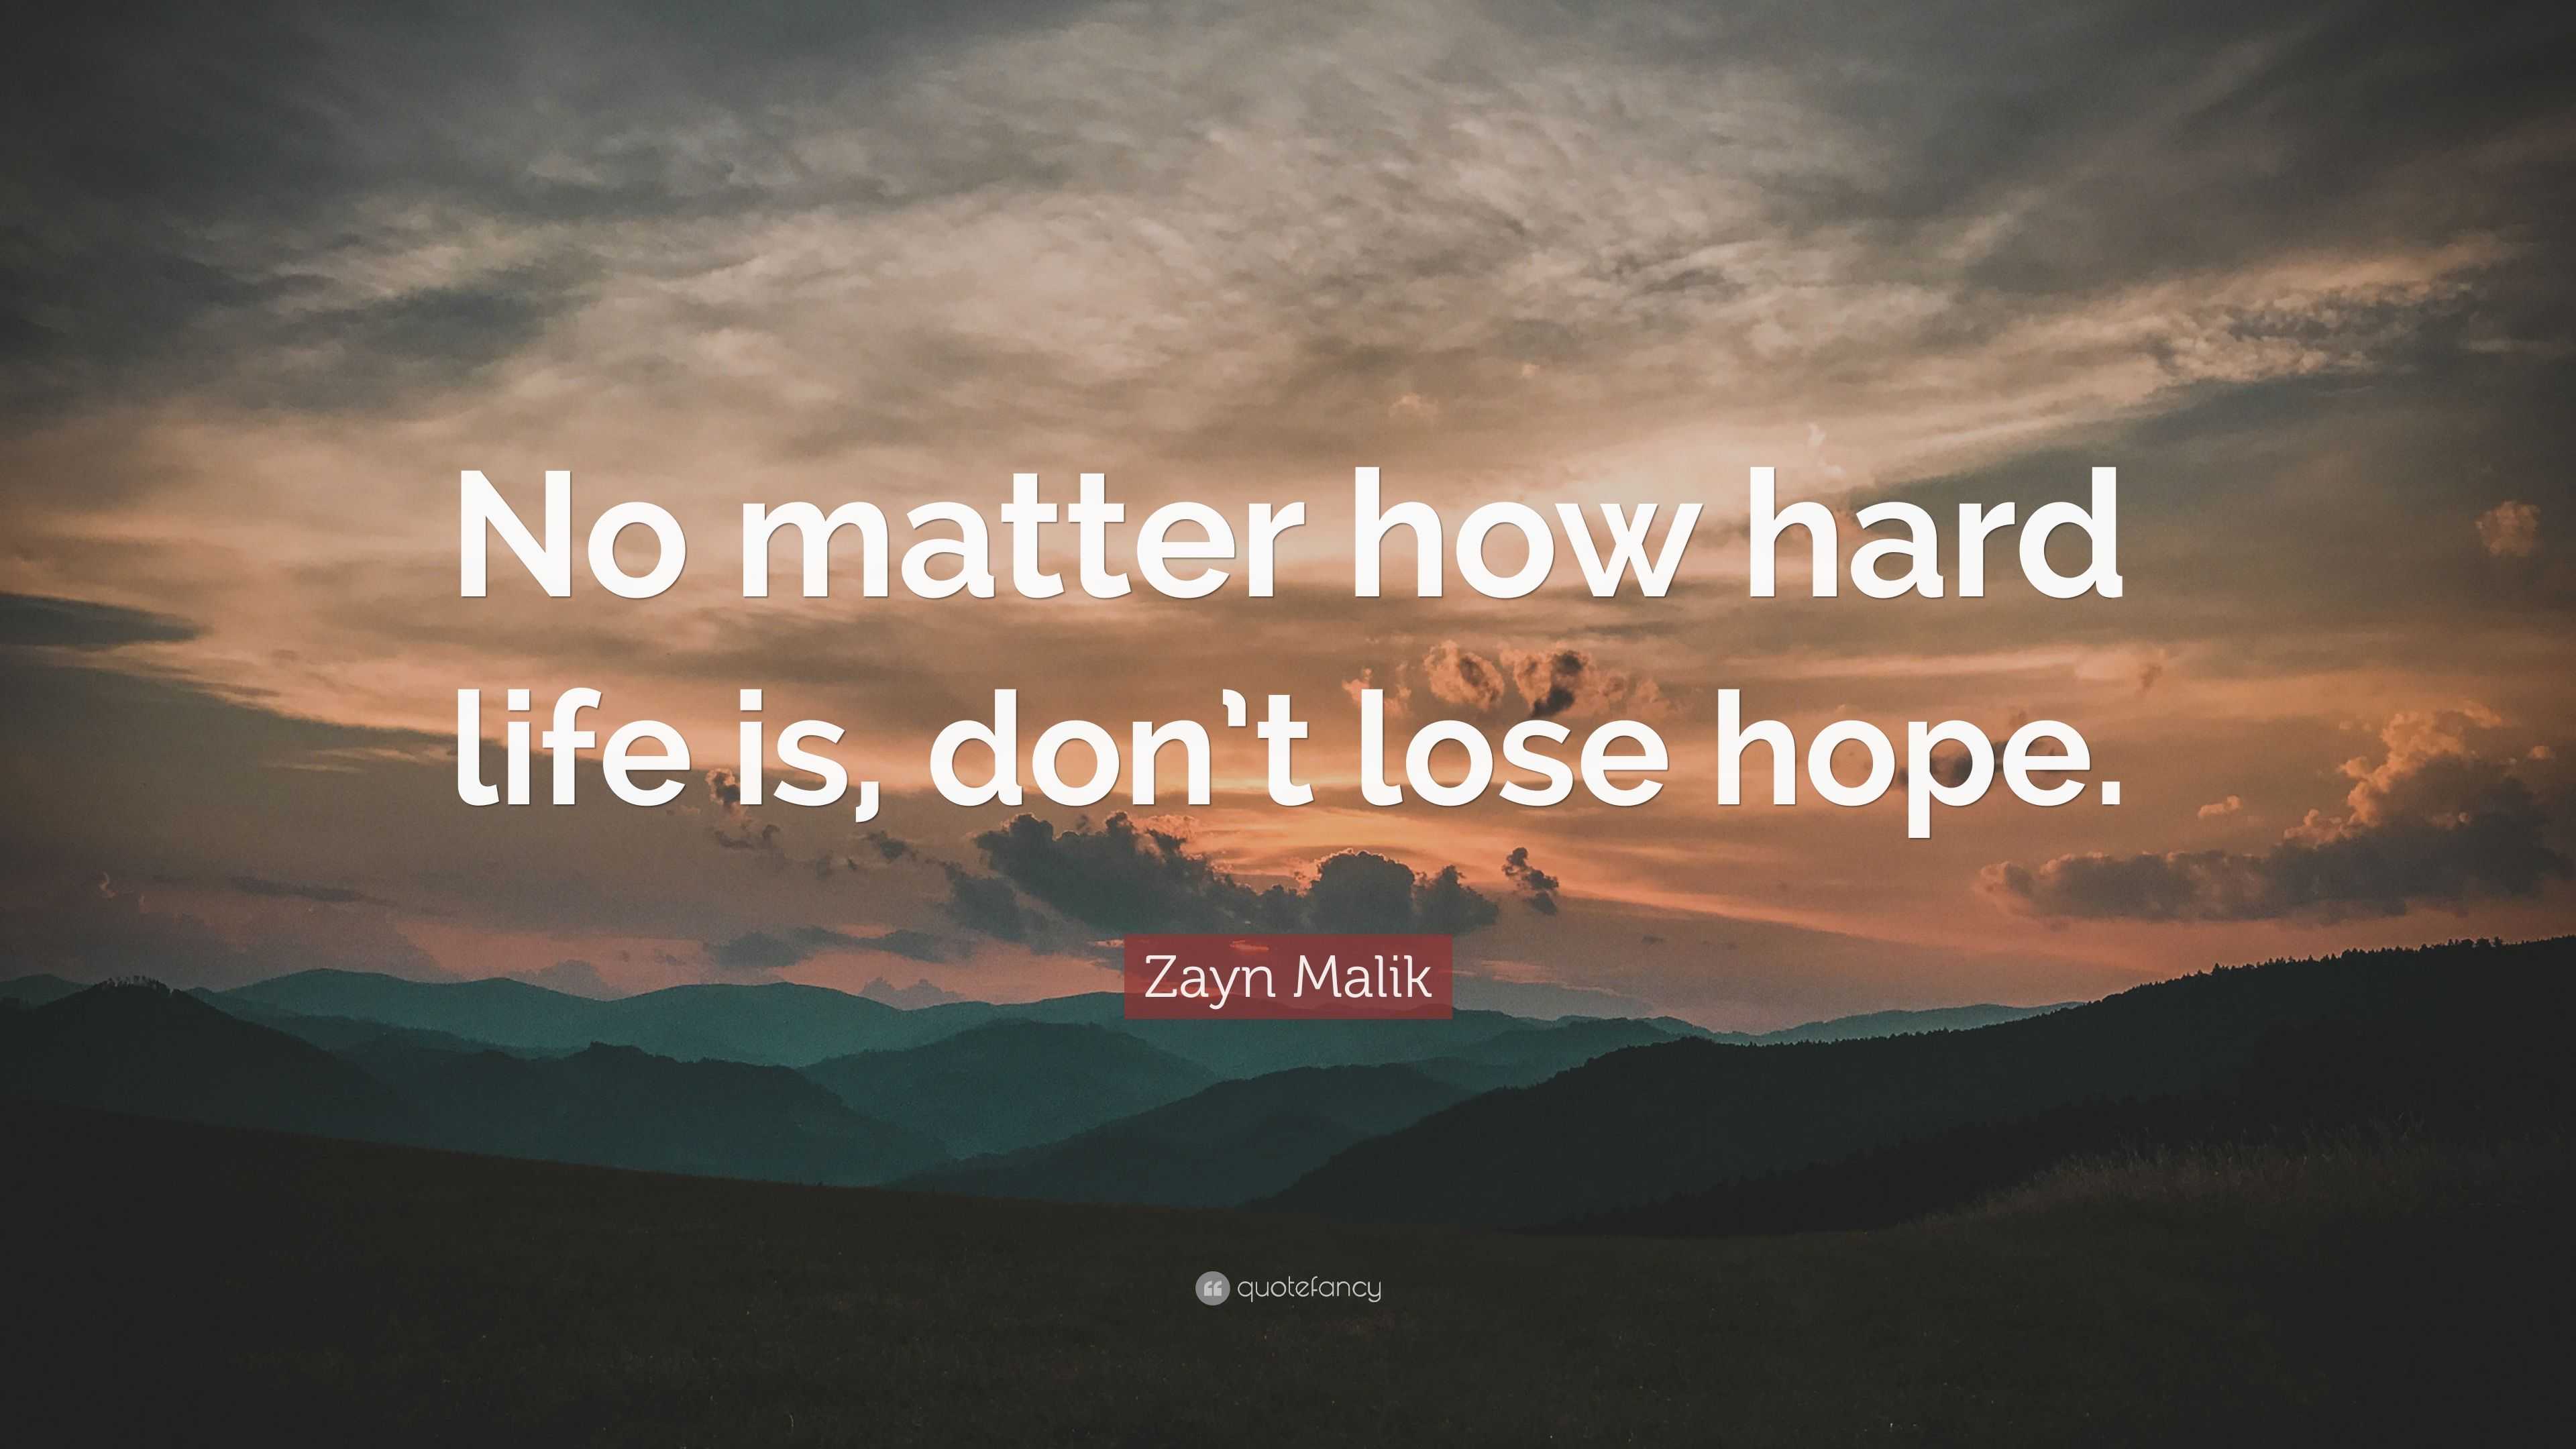 Zayn Malik Quote: “No matter how hard life is, don’t lose hope.”